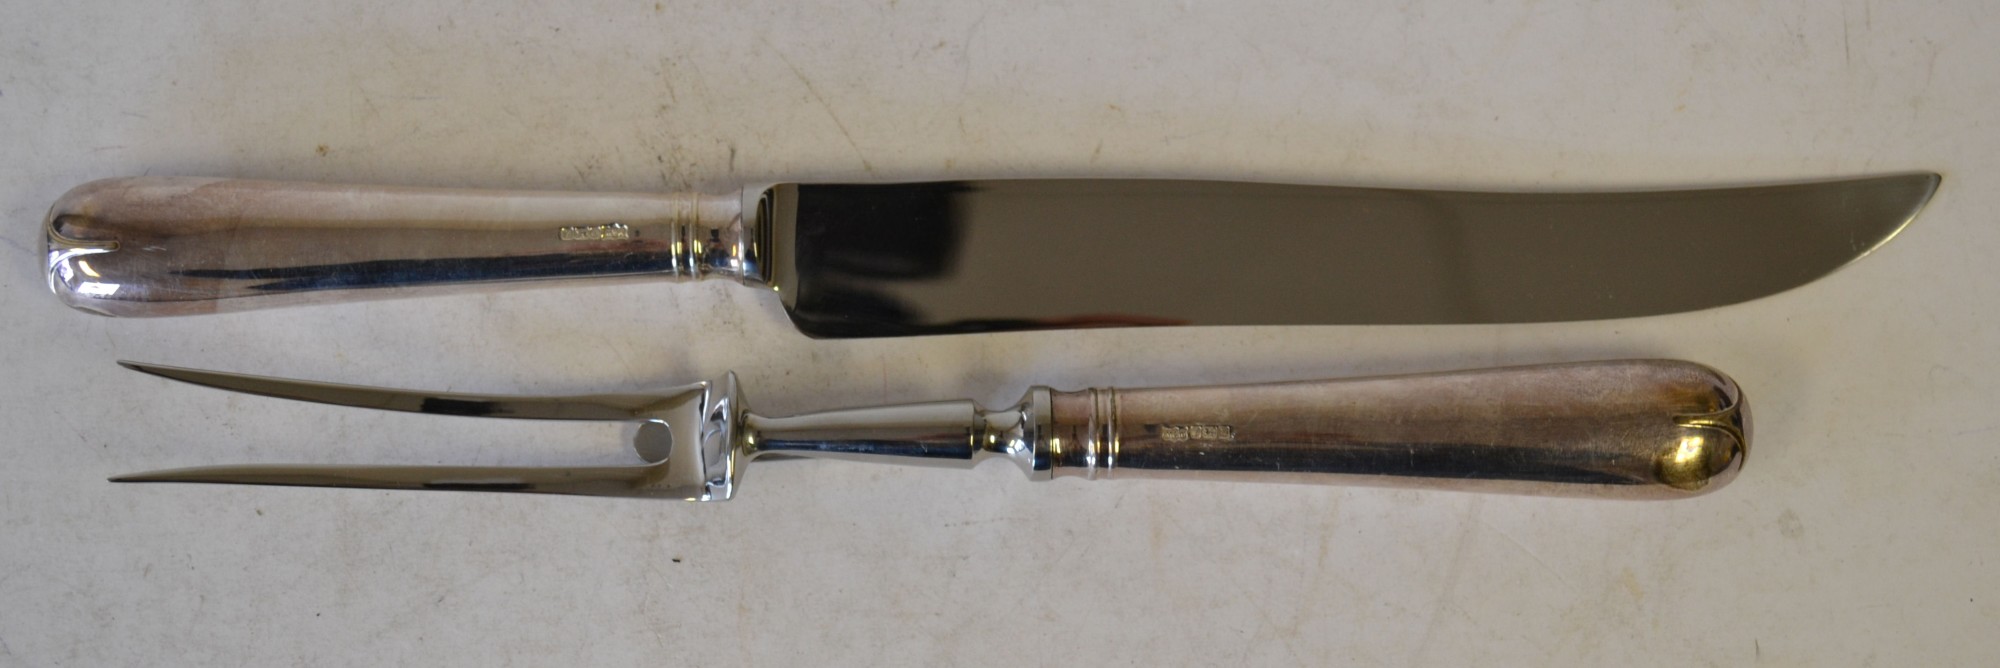 A Pair Modern London Silver Handled Carving Knife and Fork, maker Mappin & Webb